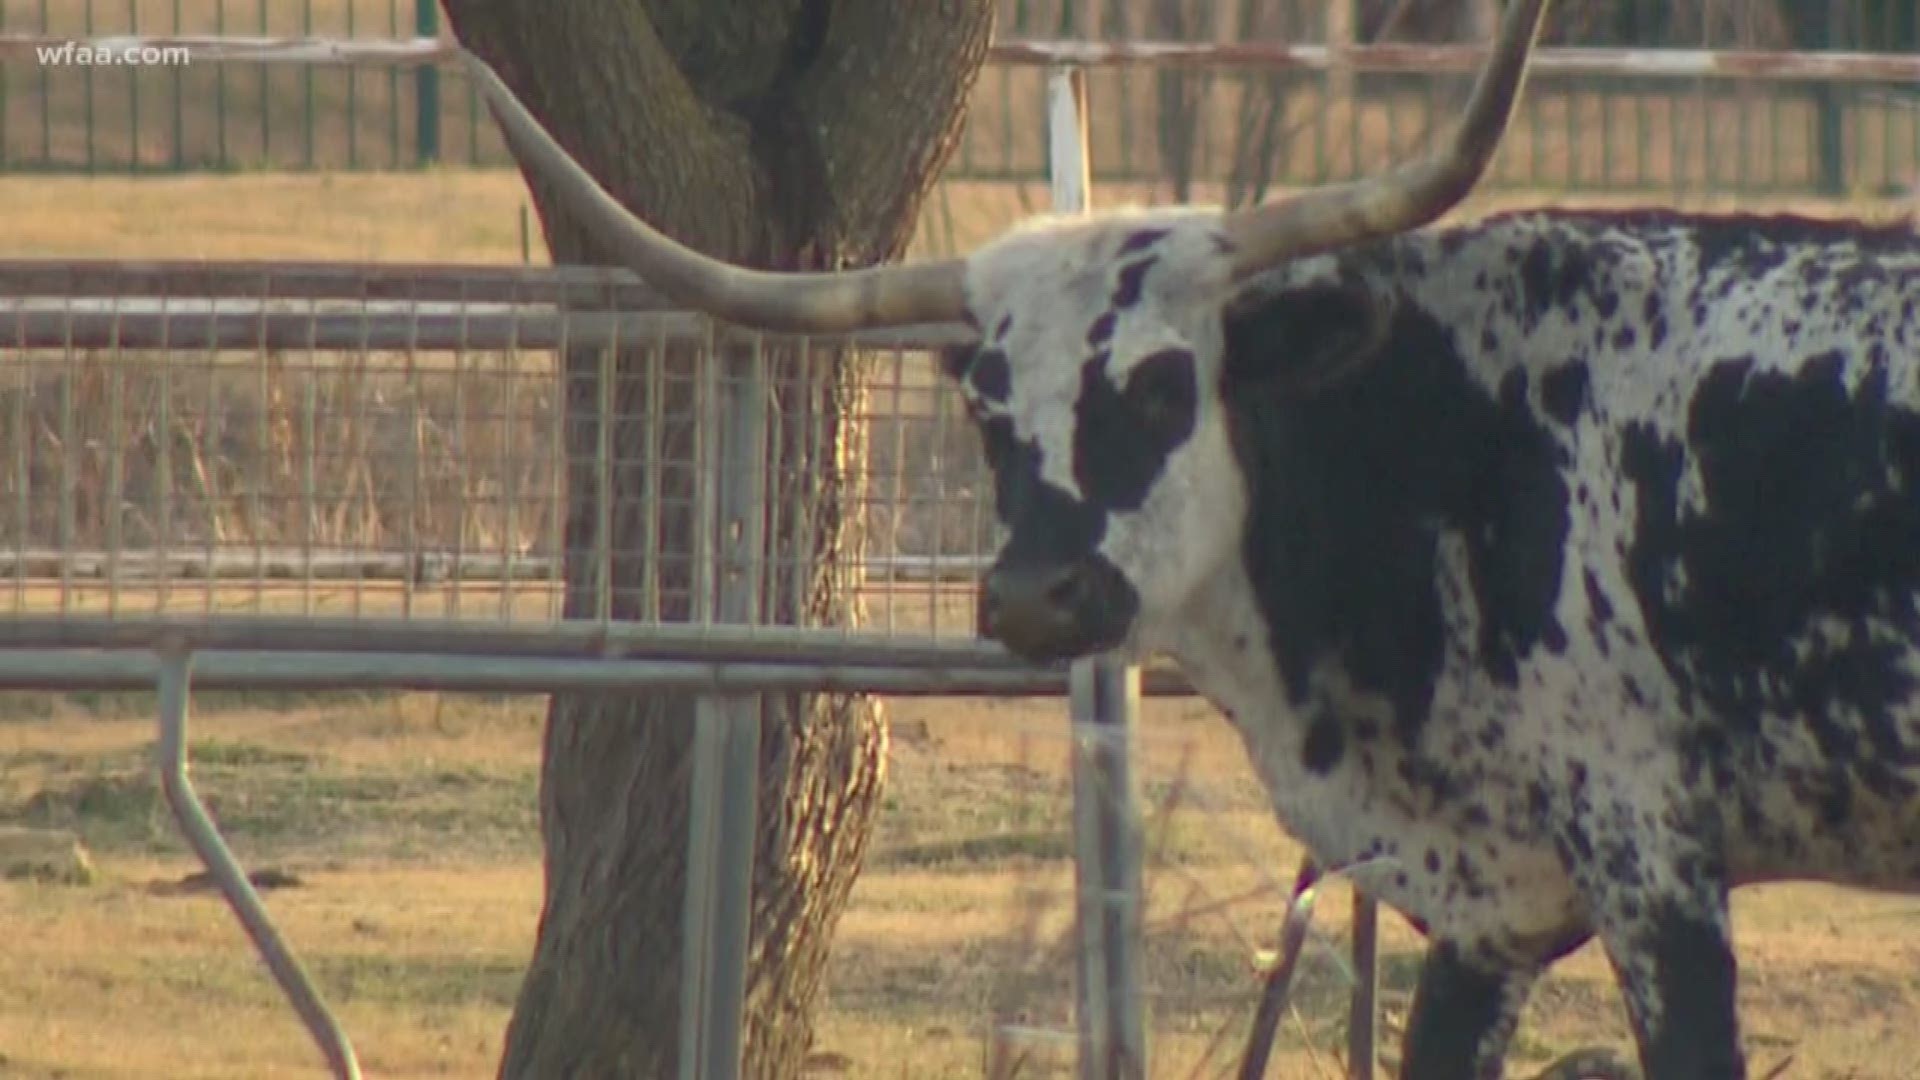 Haslet Fire and Rescue responded to an emergency call and helped release a longhorn steer using the jaws of life.